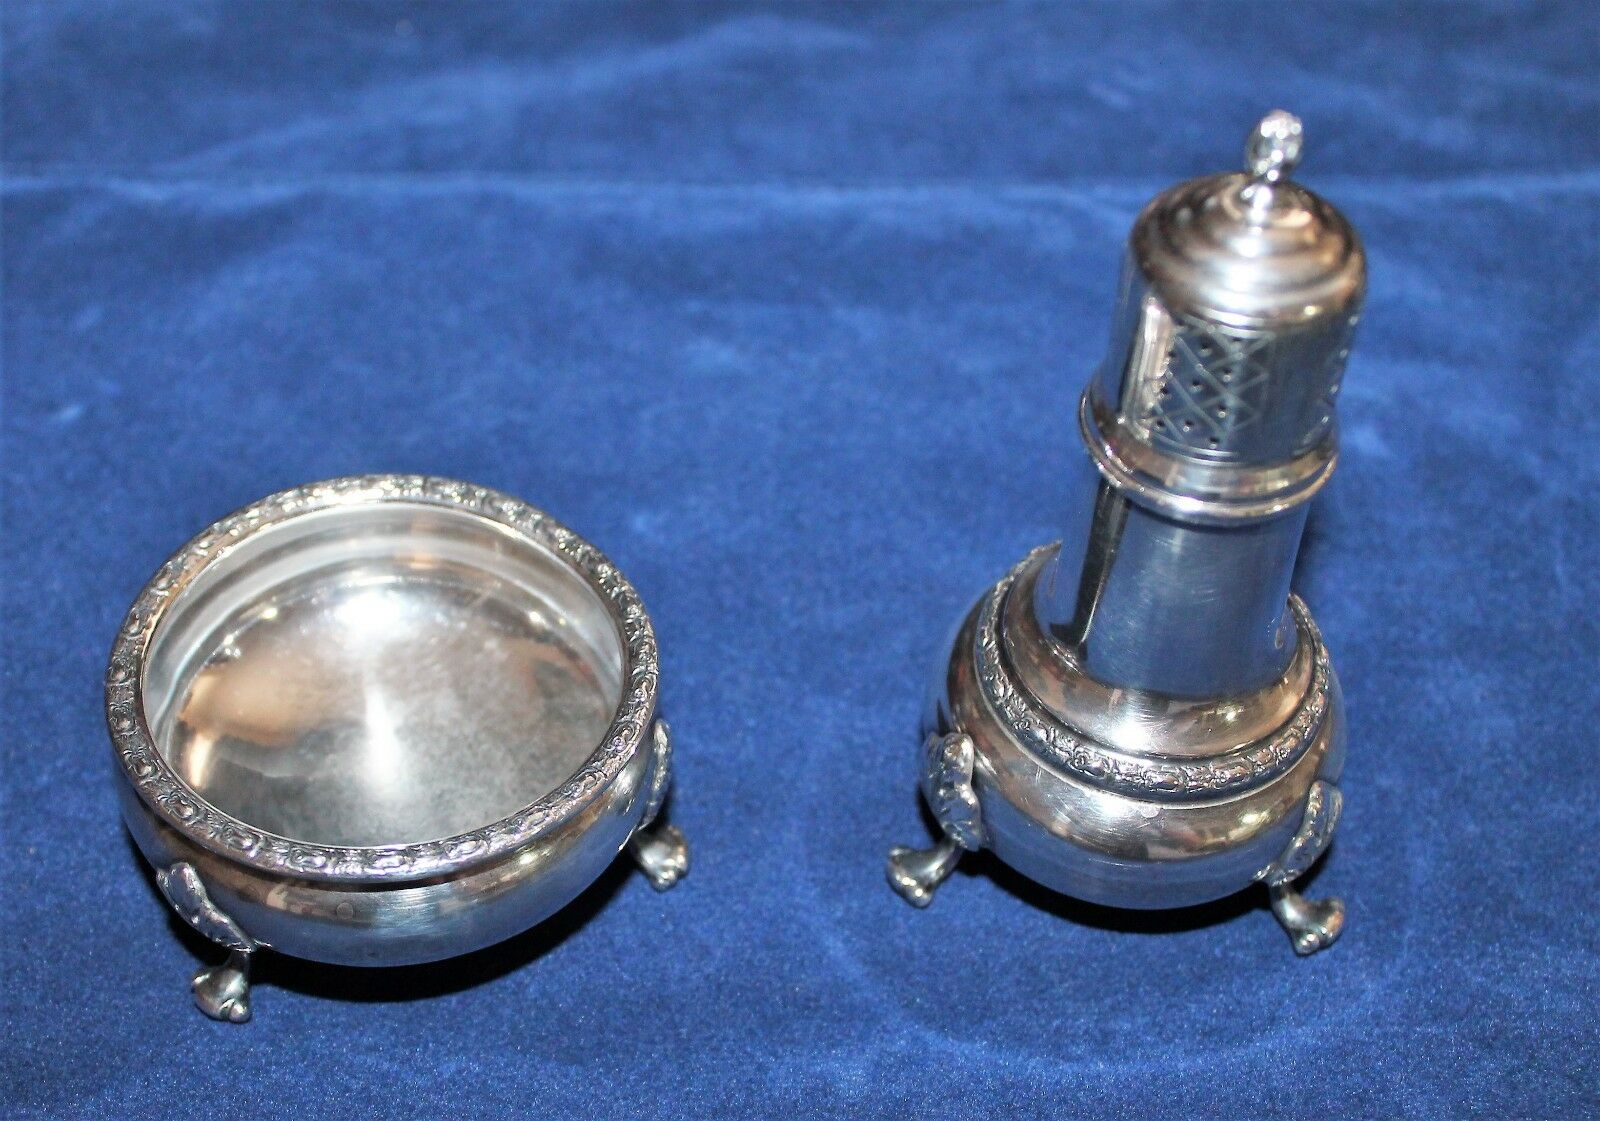 Antique Sterling Pepper Shaker And Salt Cellar By Frank Whiting Talisman Rose